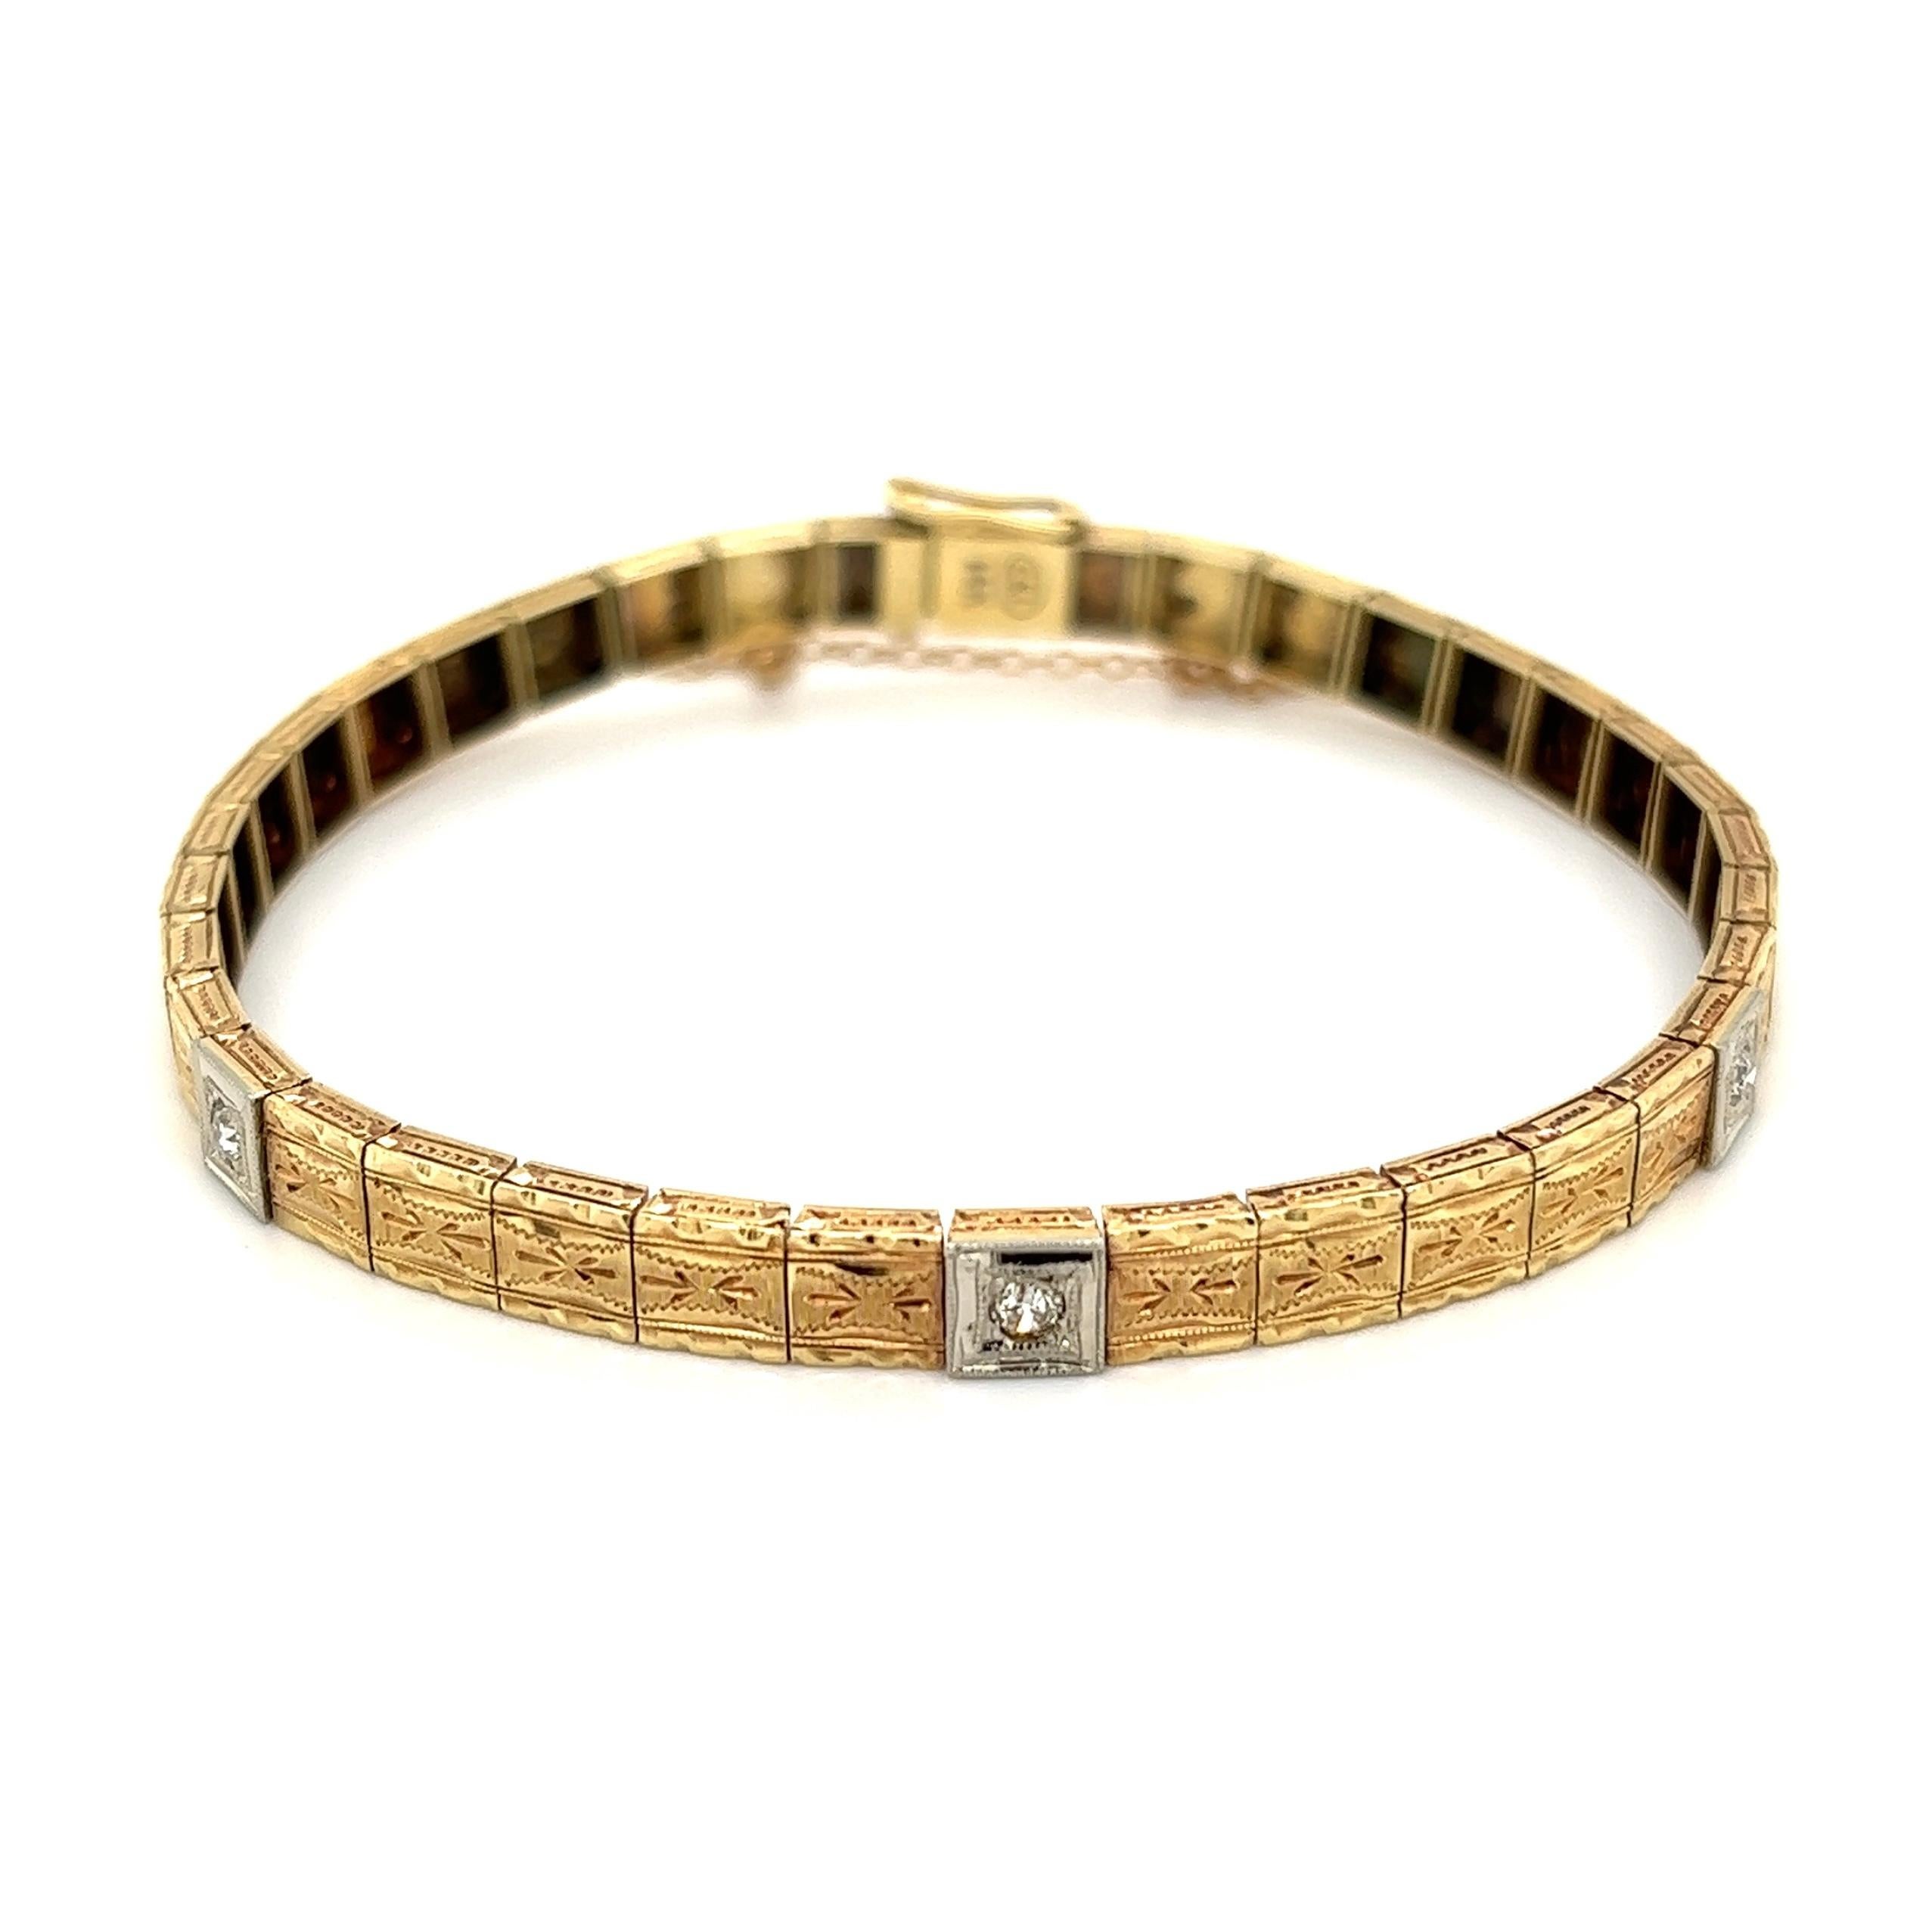 Diamond Line Tennis Bracelet. 14K Yellow Gold Square engraved Links inter-spaced with 3 Diamond stations set in Platinum. Hand set and Hand crafted in 14K Yellow Gold and Platinum. Bracelet measures approx. 7.25” long. Chic and Classic and so easy